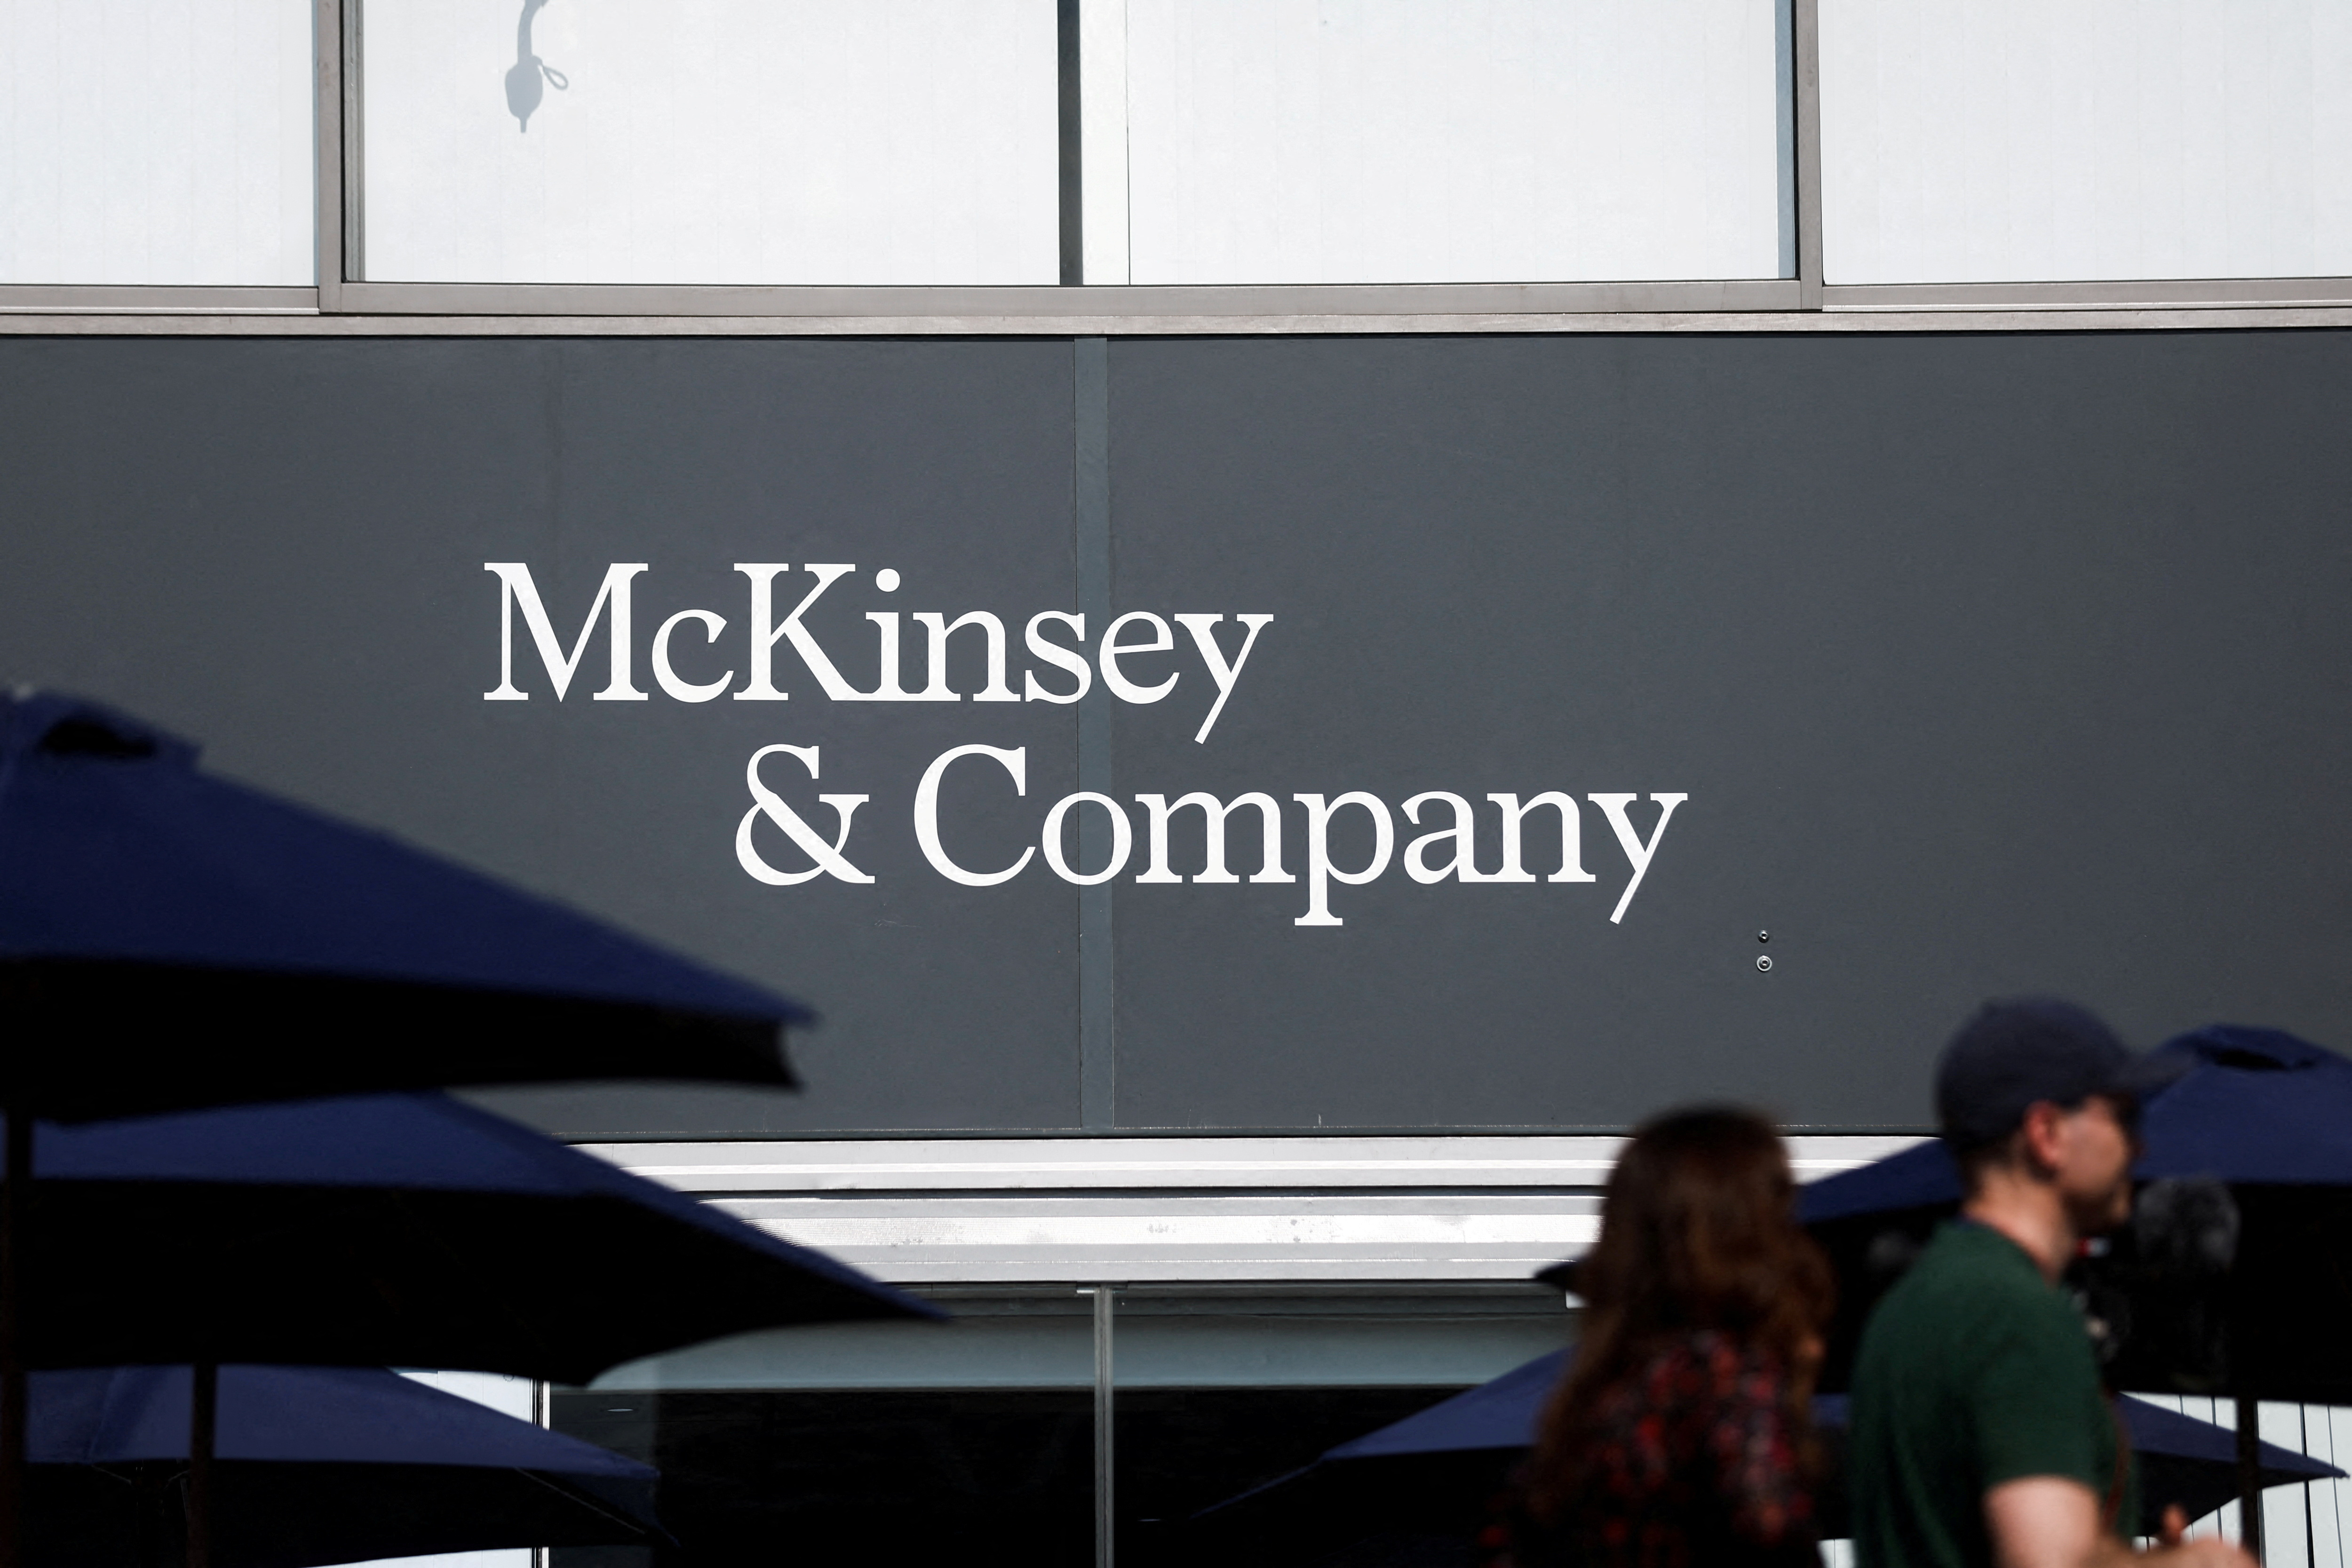 The McKinsey & Company logo is displayed in Paris